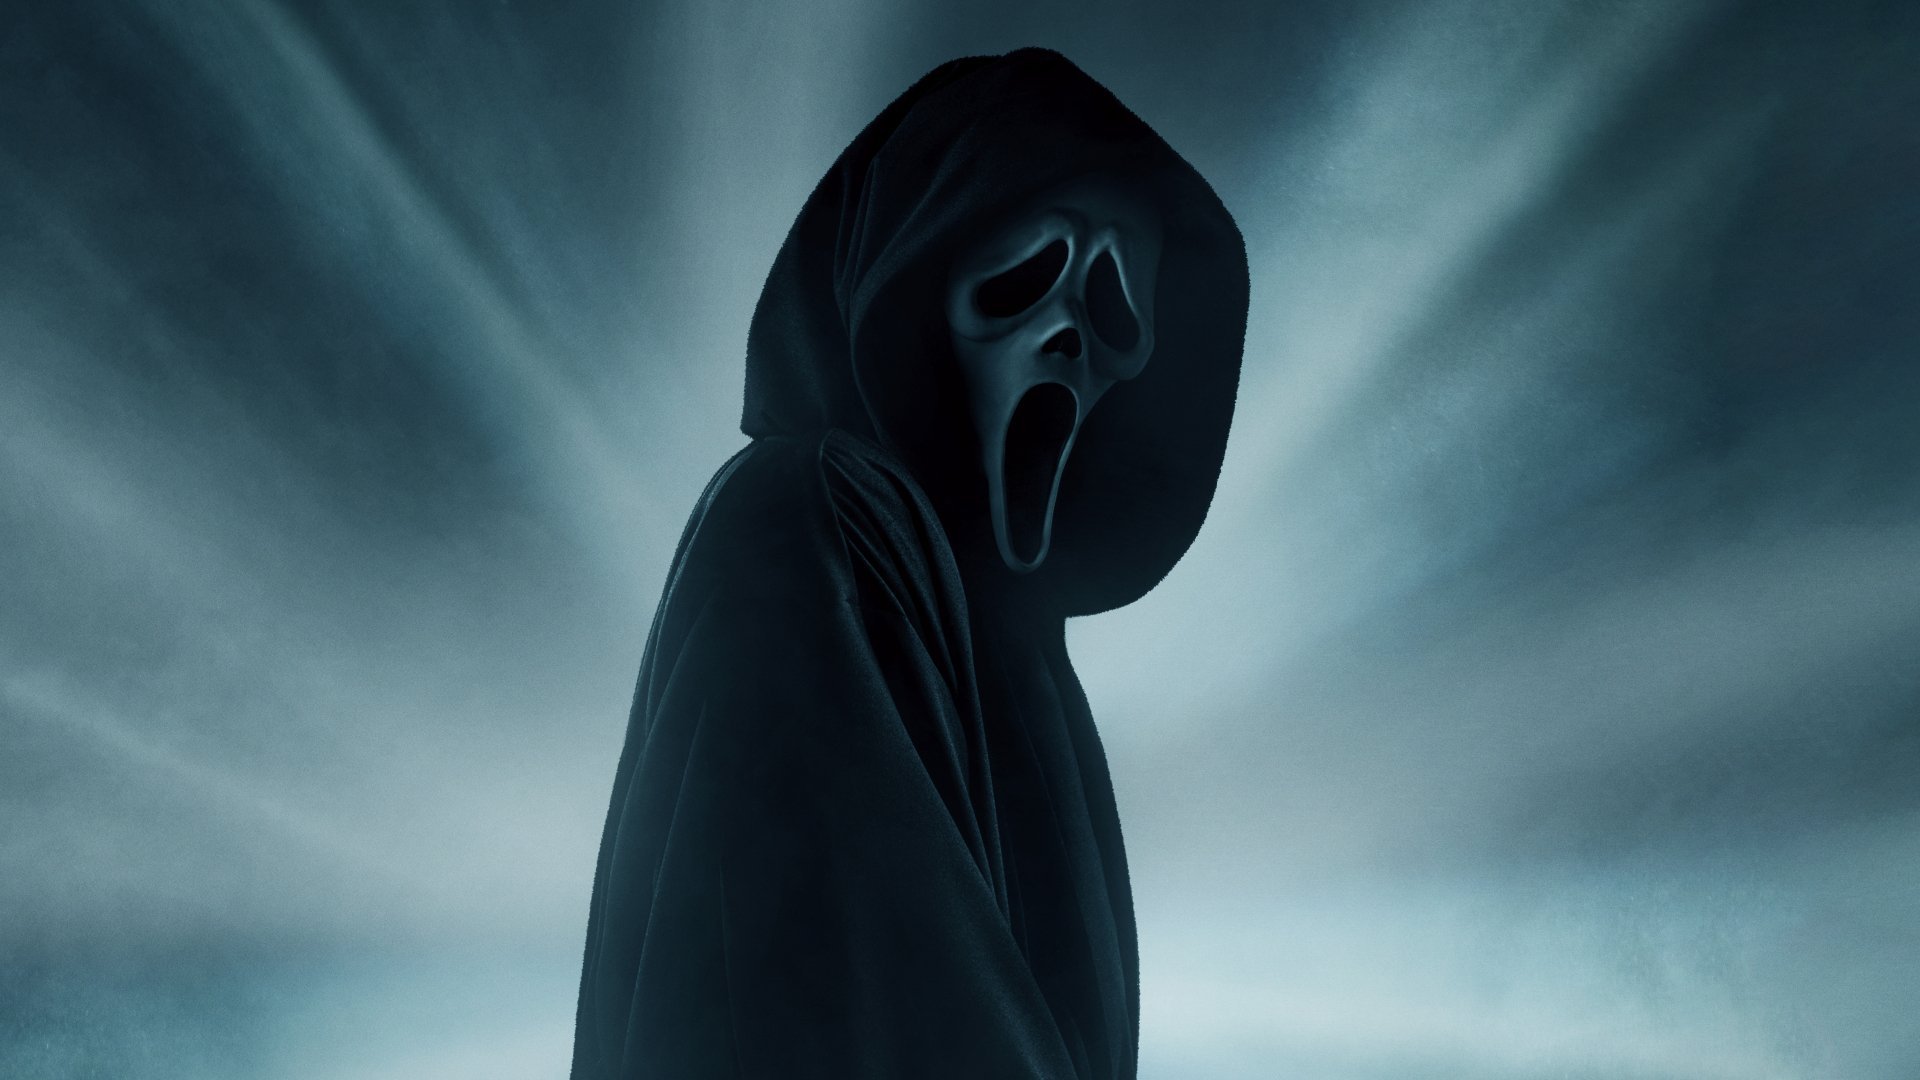 Scream (2022) HD Wallpaper and Background Image